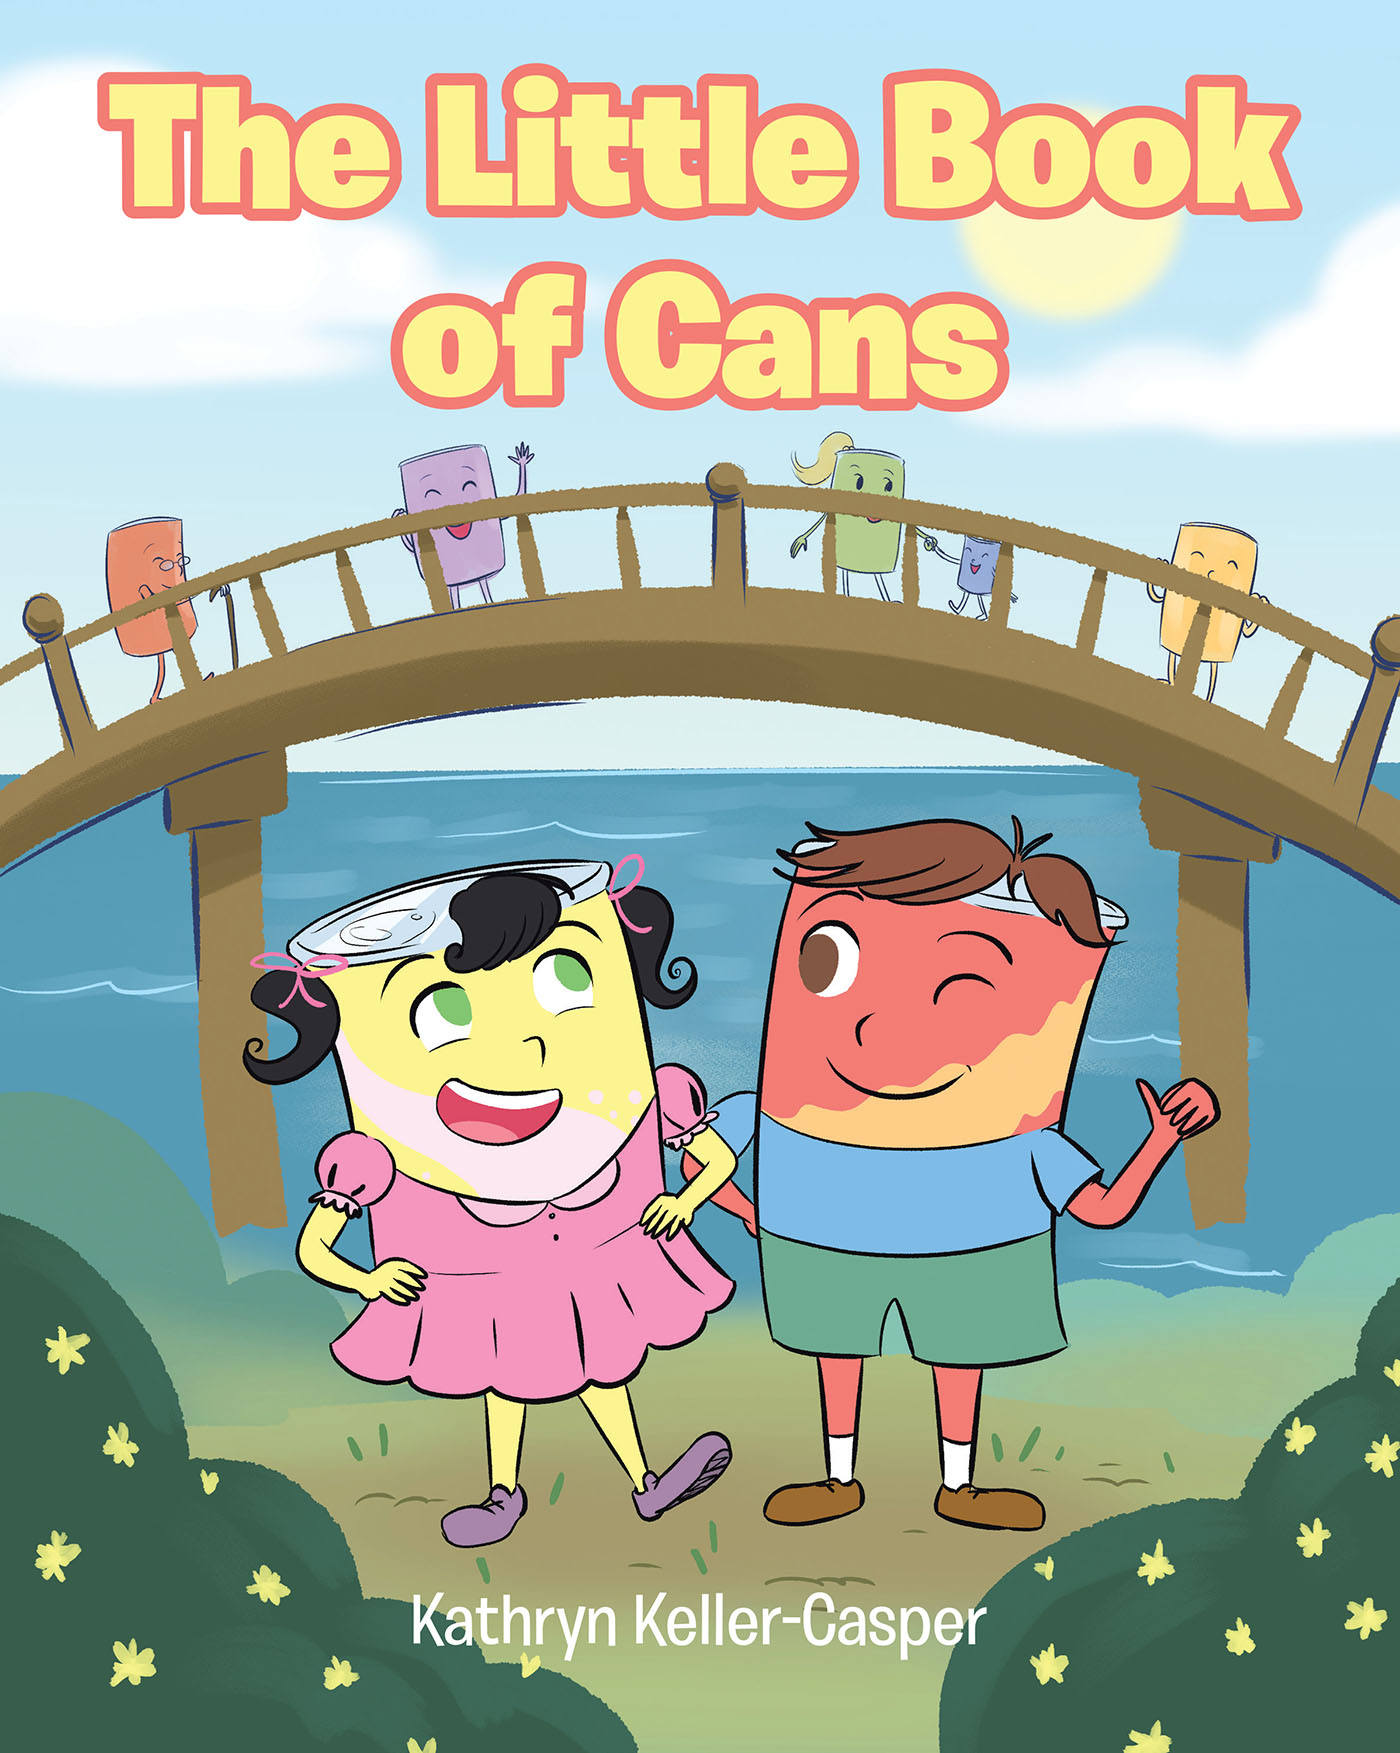 Kathryn Keller-Casper’s Newly Released "The Little Book of Cans" is a Delightful Story of Two Unique Friends Who Find That with the Right Attitude, Anything is Possible